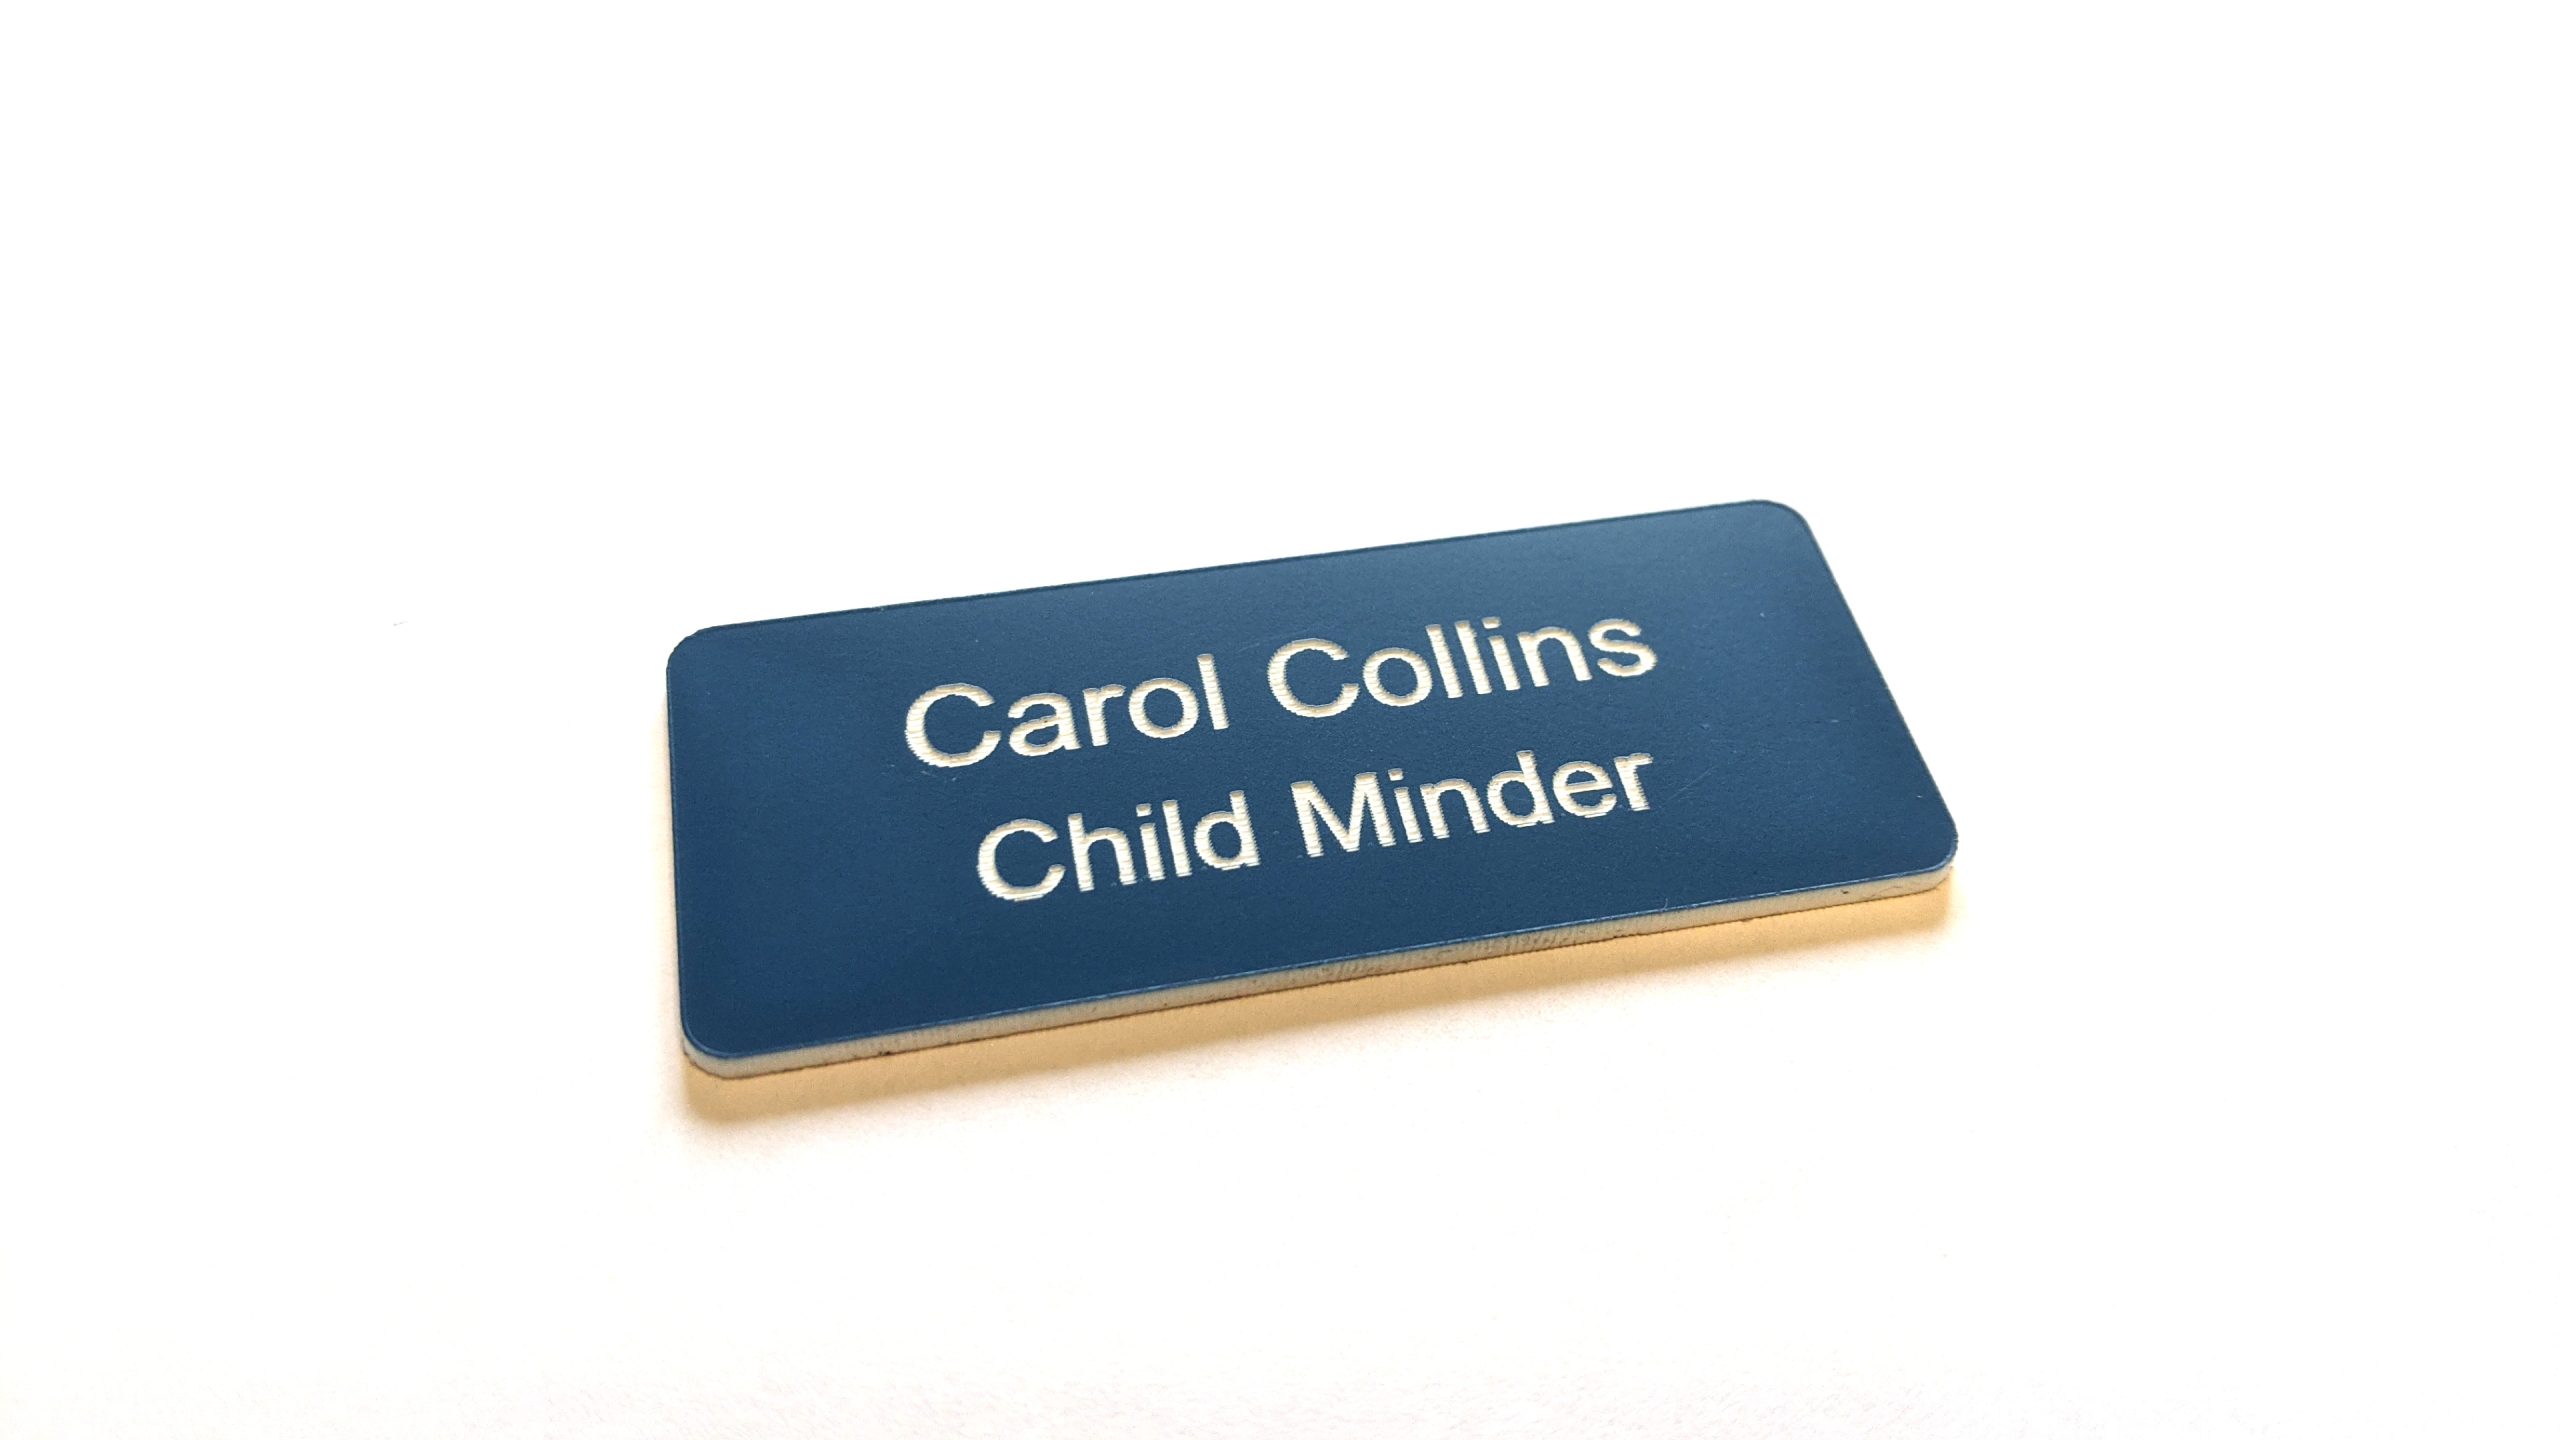 A navy blue name badge with white engraved text